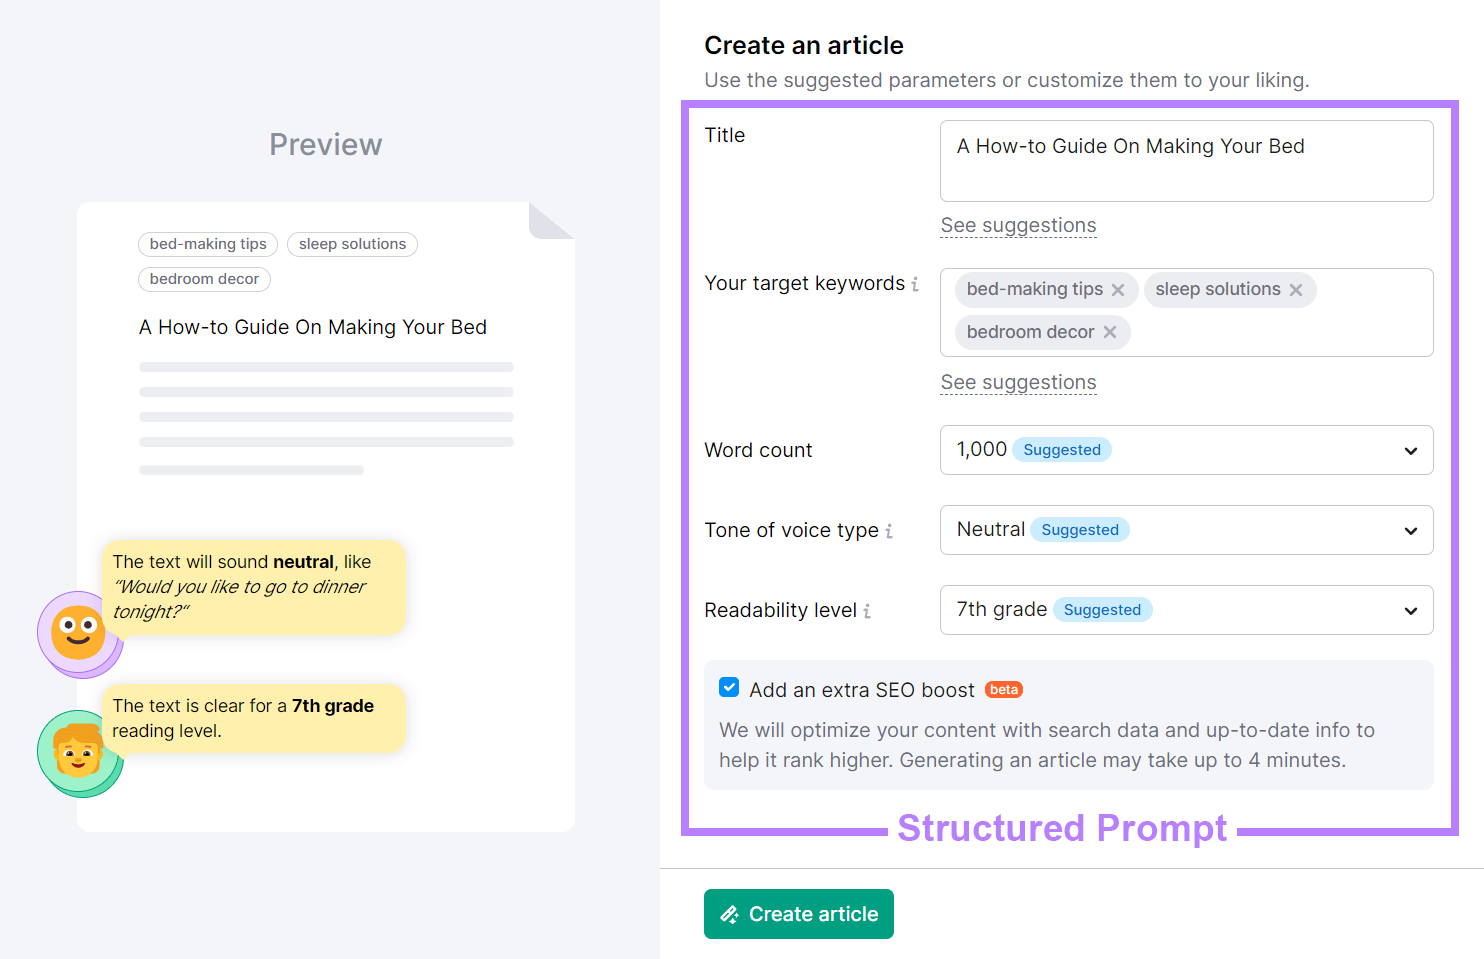 ContentShake AI create an article step with Prompts area highlighted and marked as Structure Prompts.